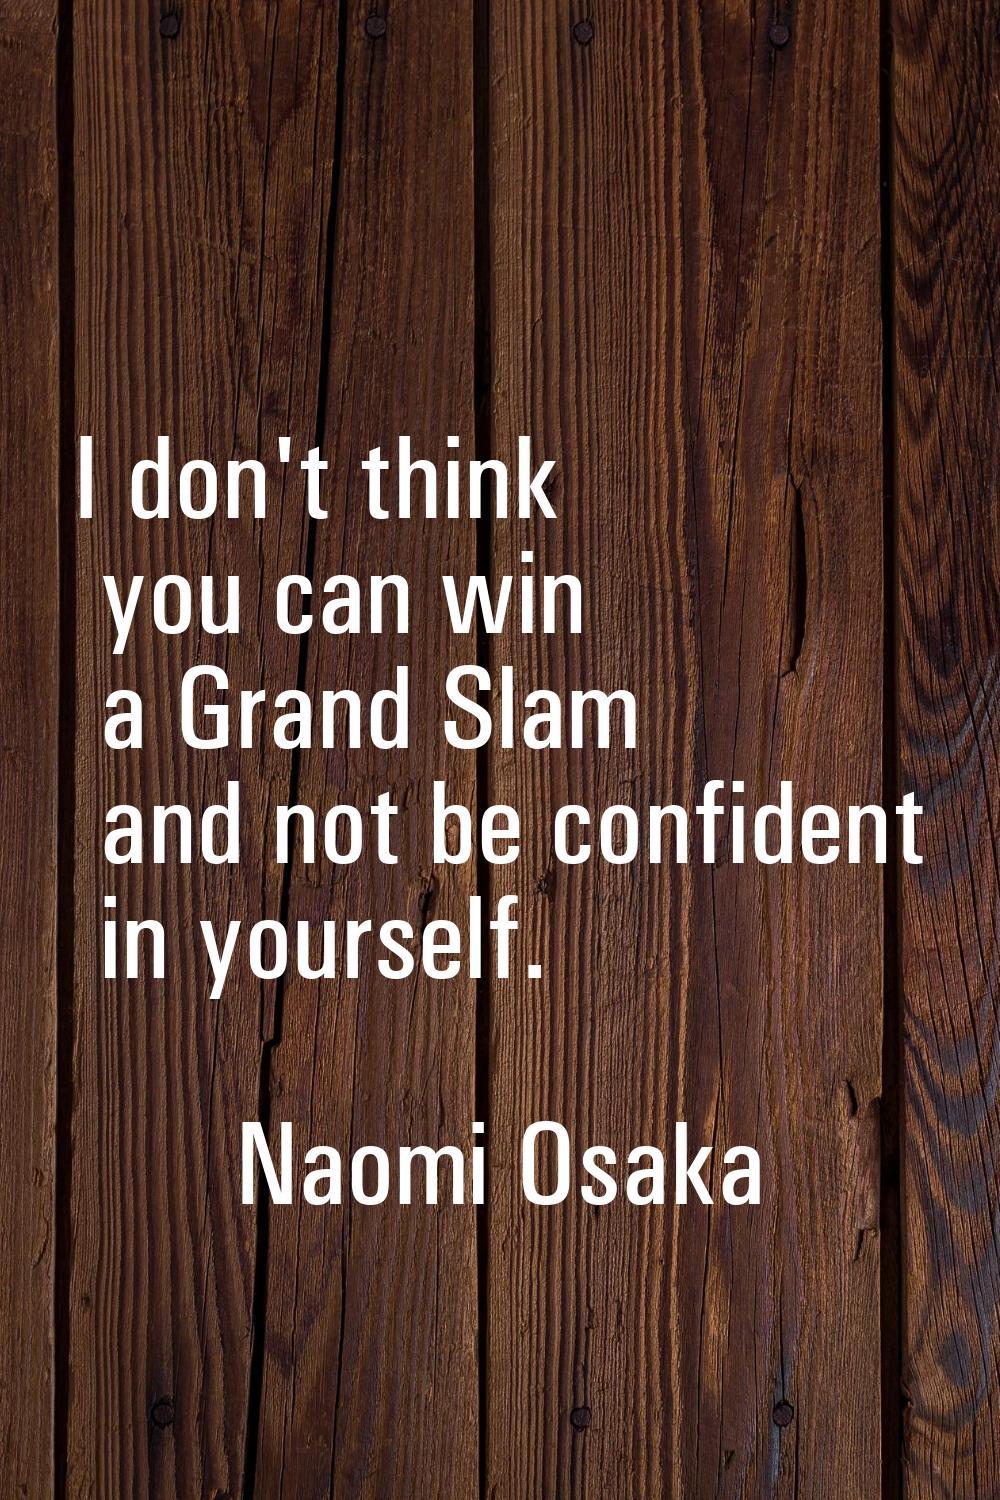 I don't think you can win a Grand Slam and not be confident in yourself.